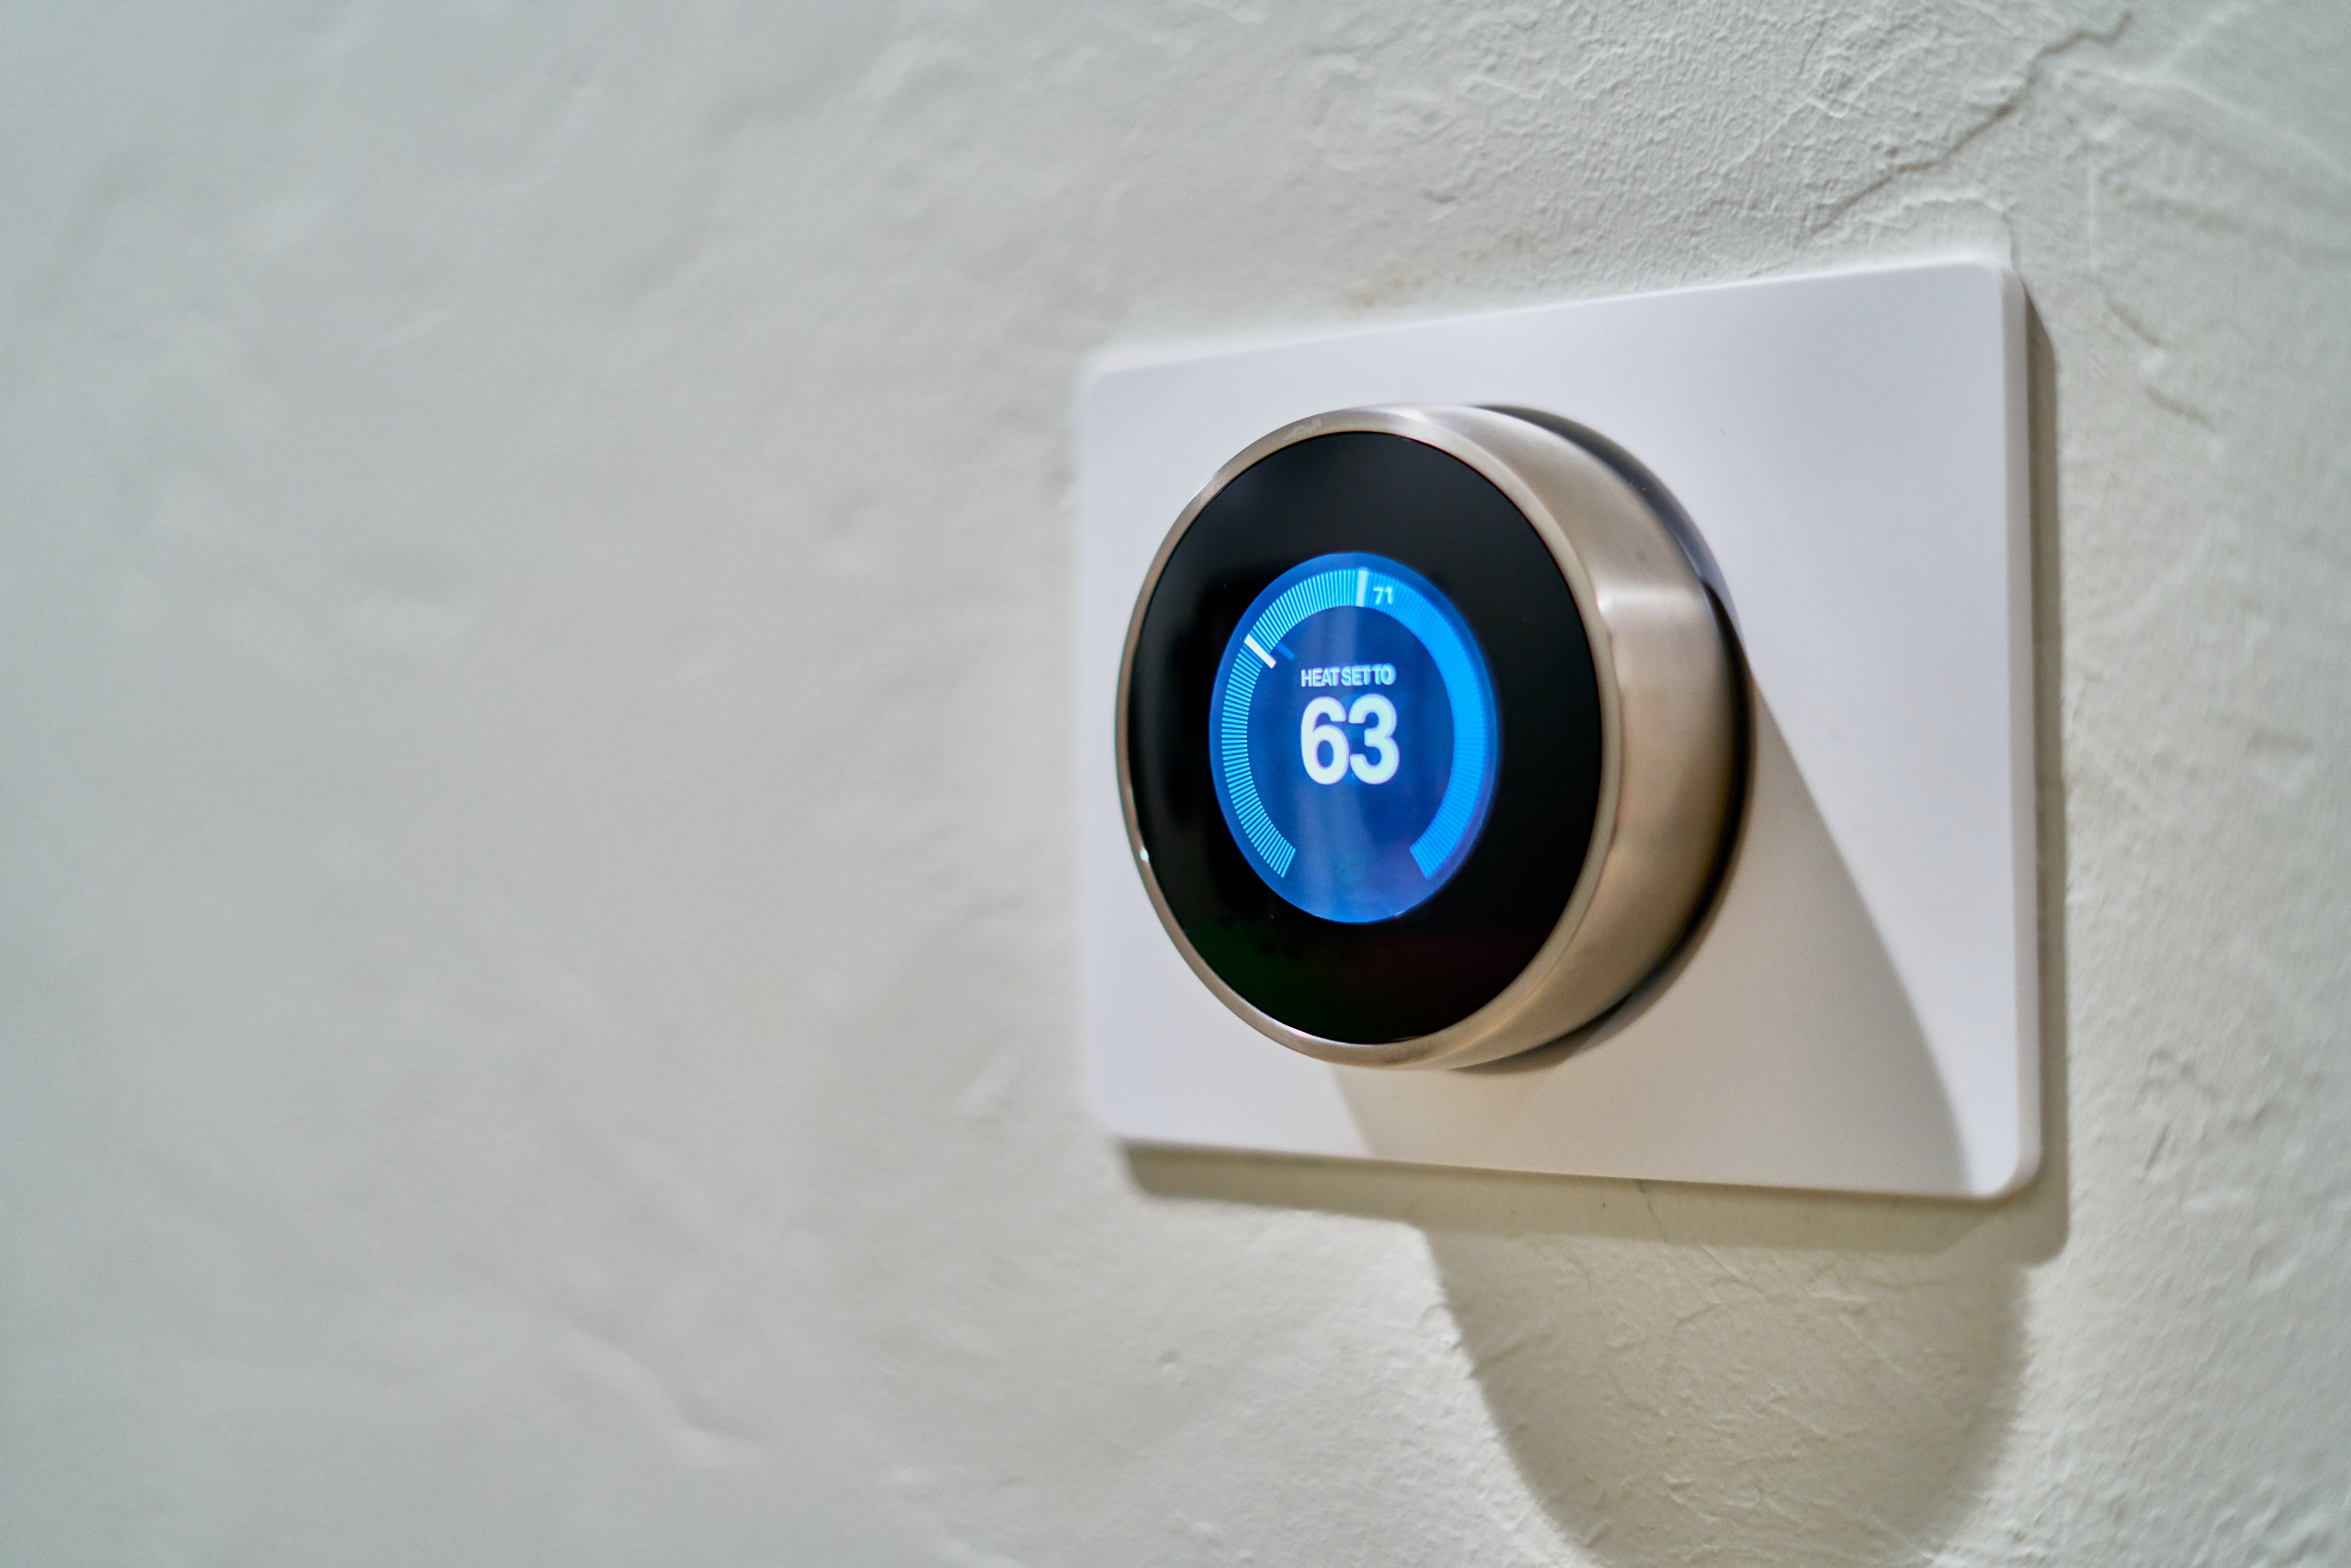 Smart thermostats your home needs before winter steps in » Gadget Flow